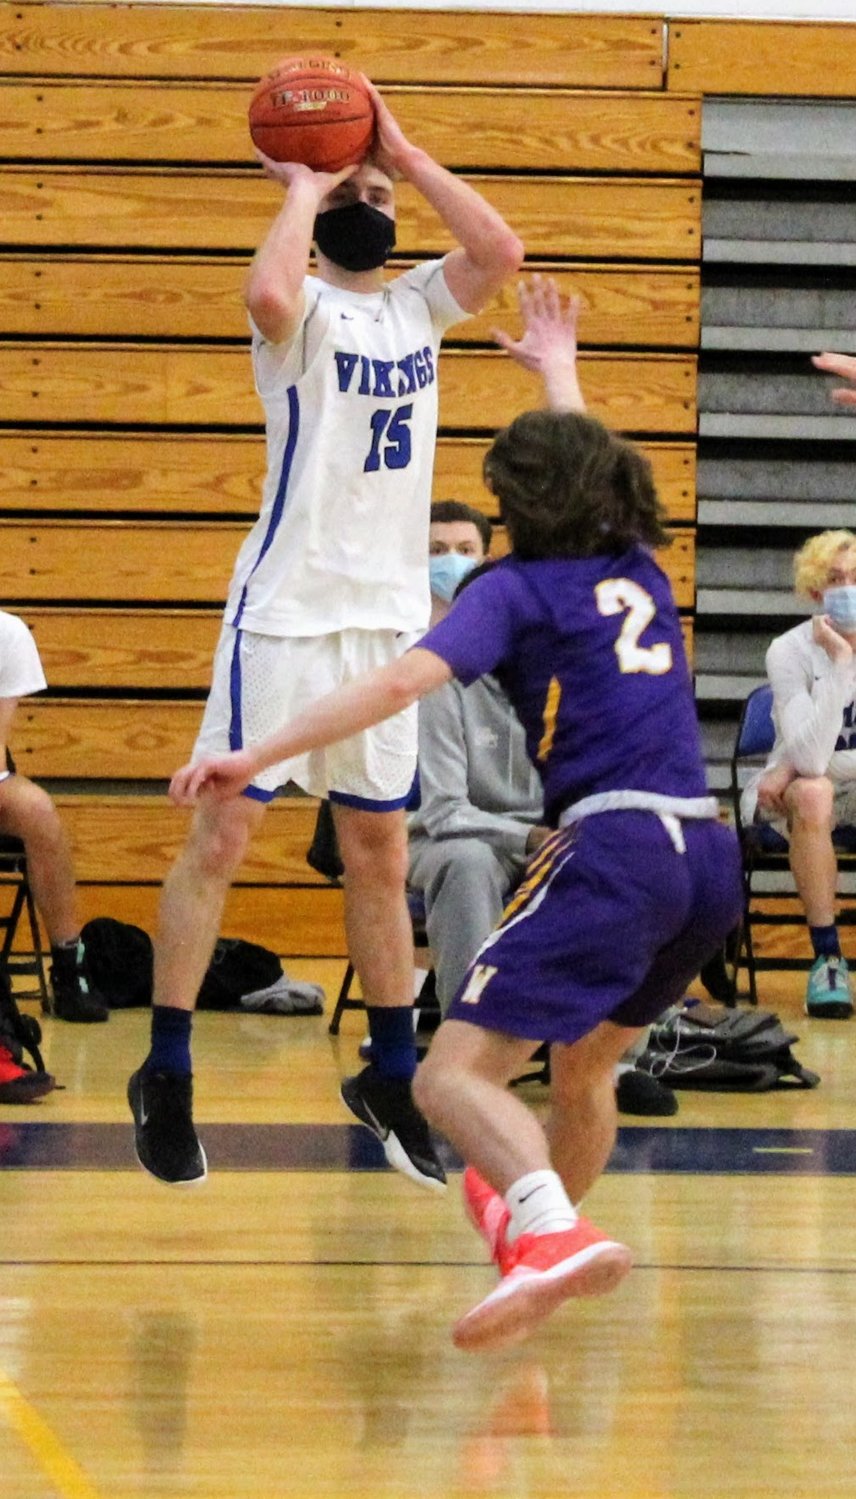 Valley Central’s Zach Bealer shoots over Warwick’s Sean Cosgrove during Wednesday’s boys’ basketball game at Valley Central High School in Montgomery.